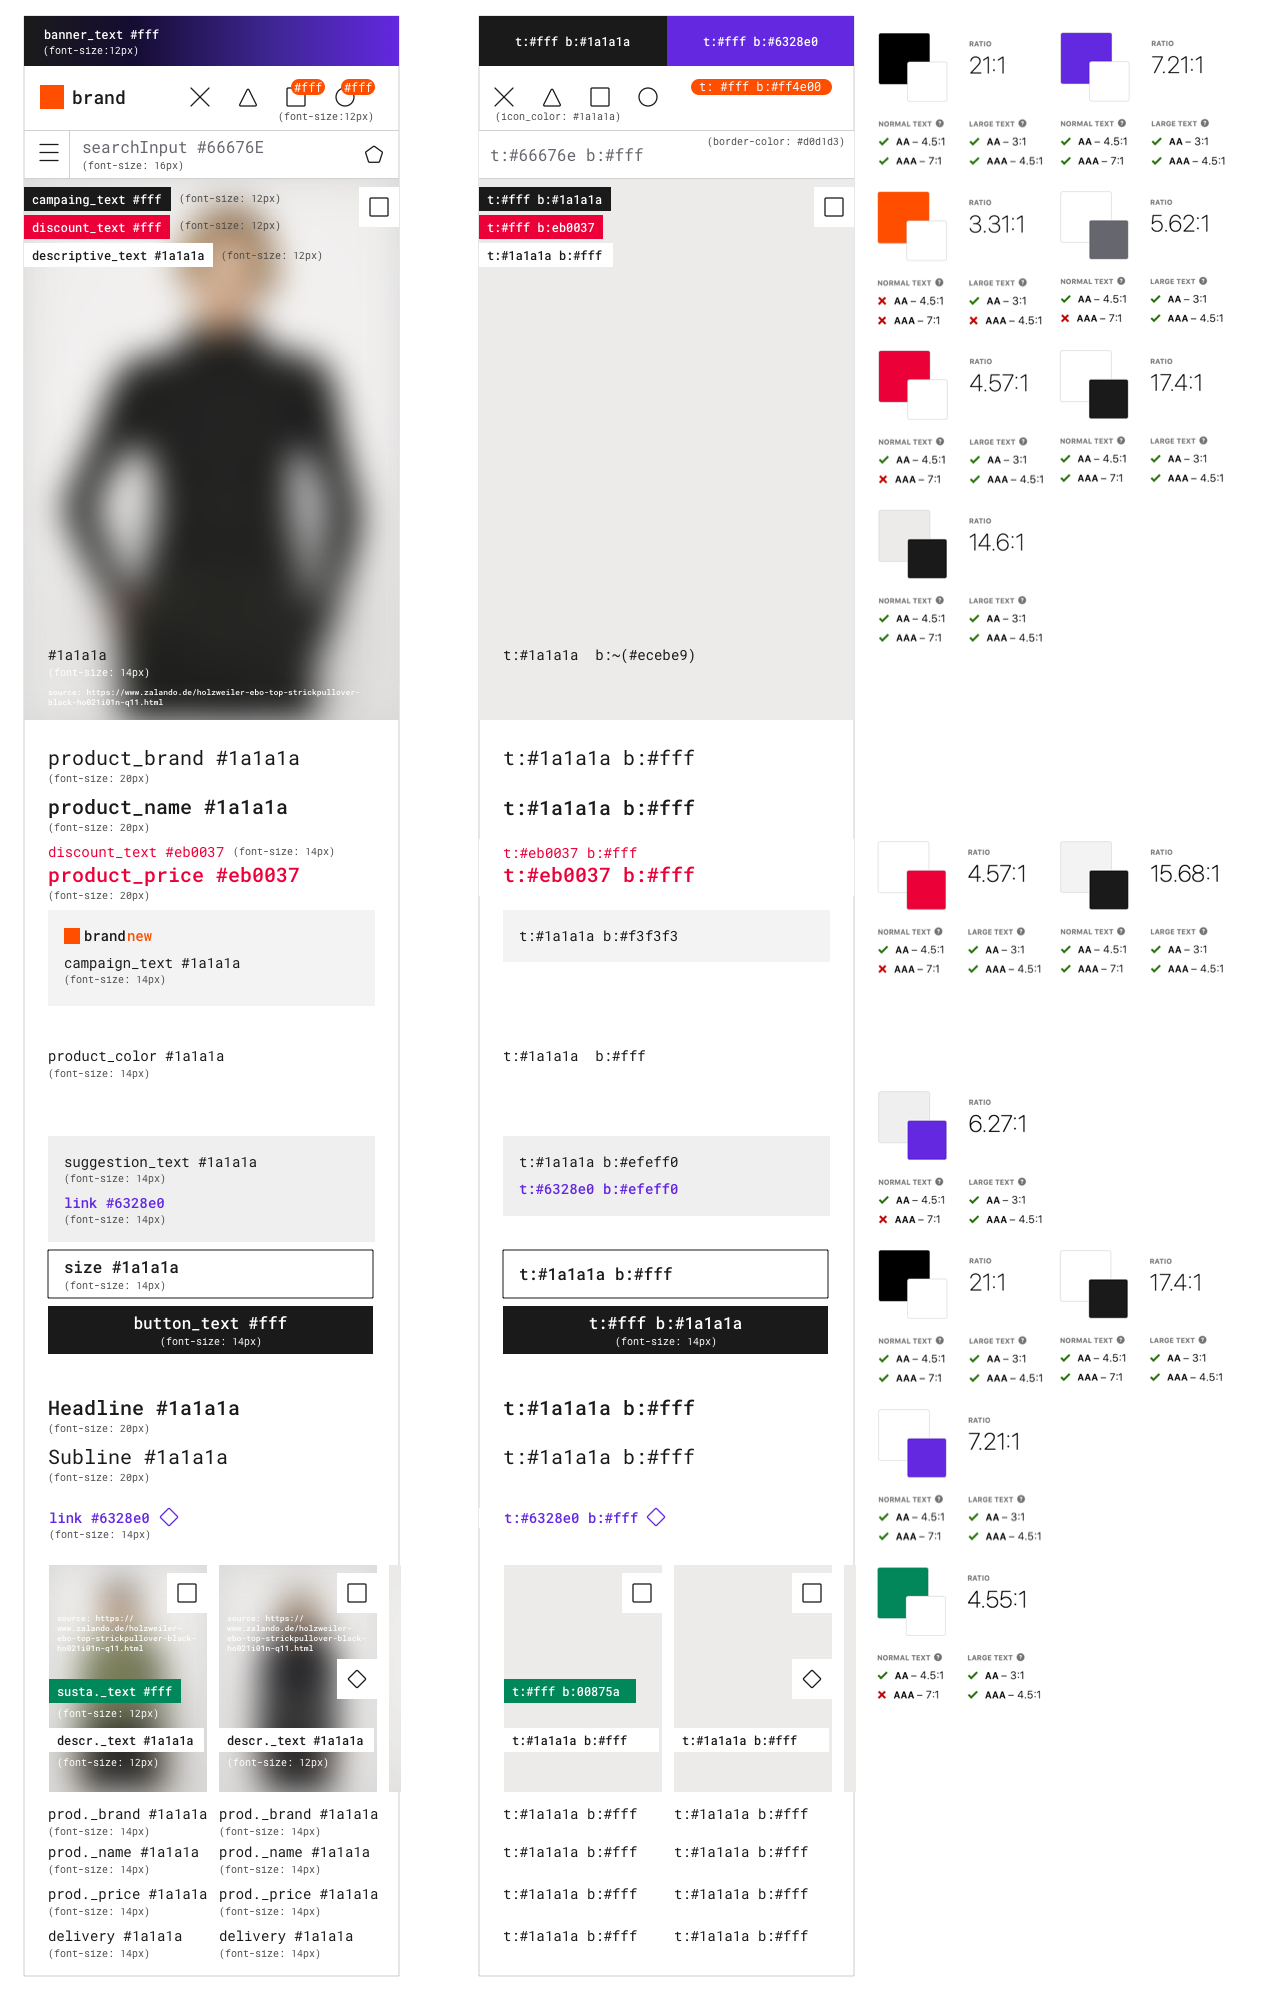 A visualized summary of all colors used on zalando.de with a focus on color contrast ratios